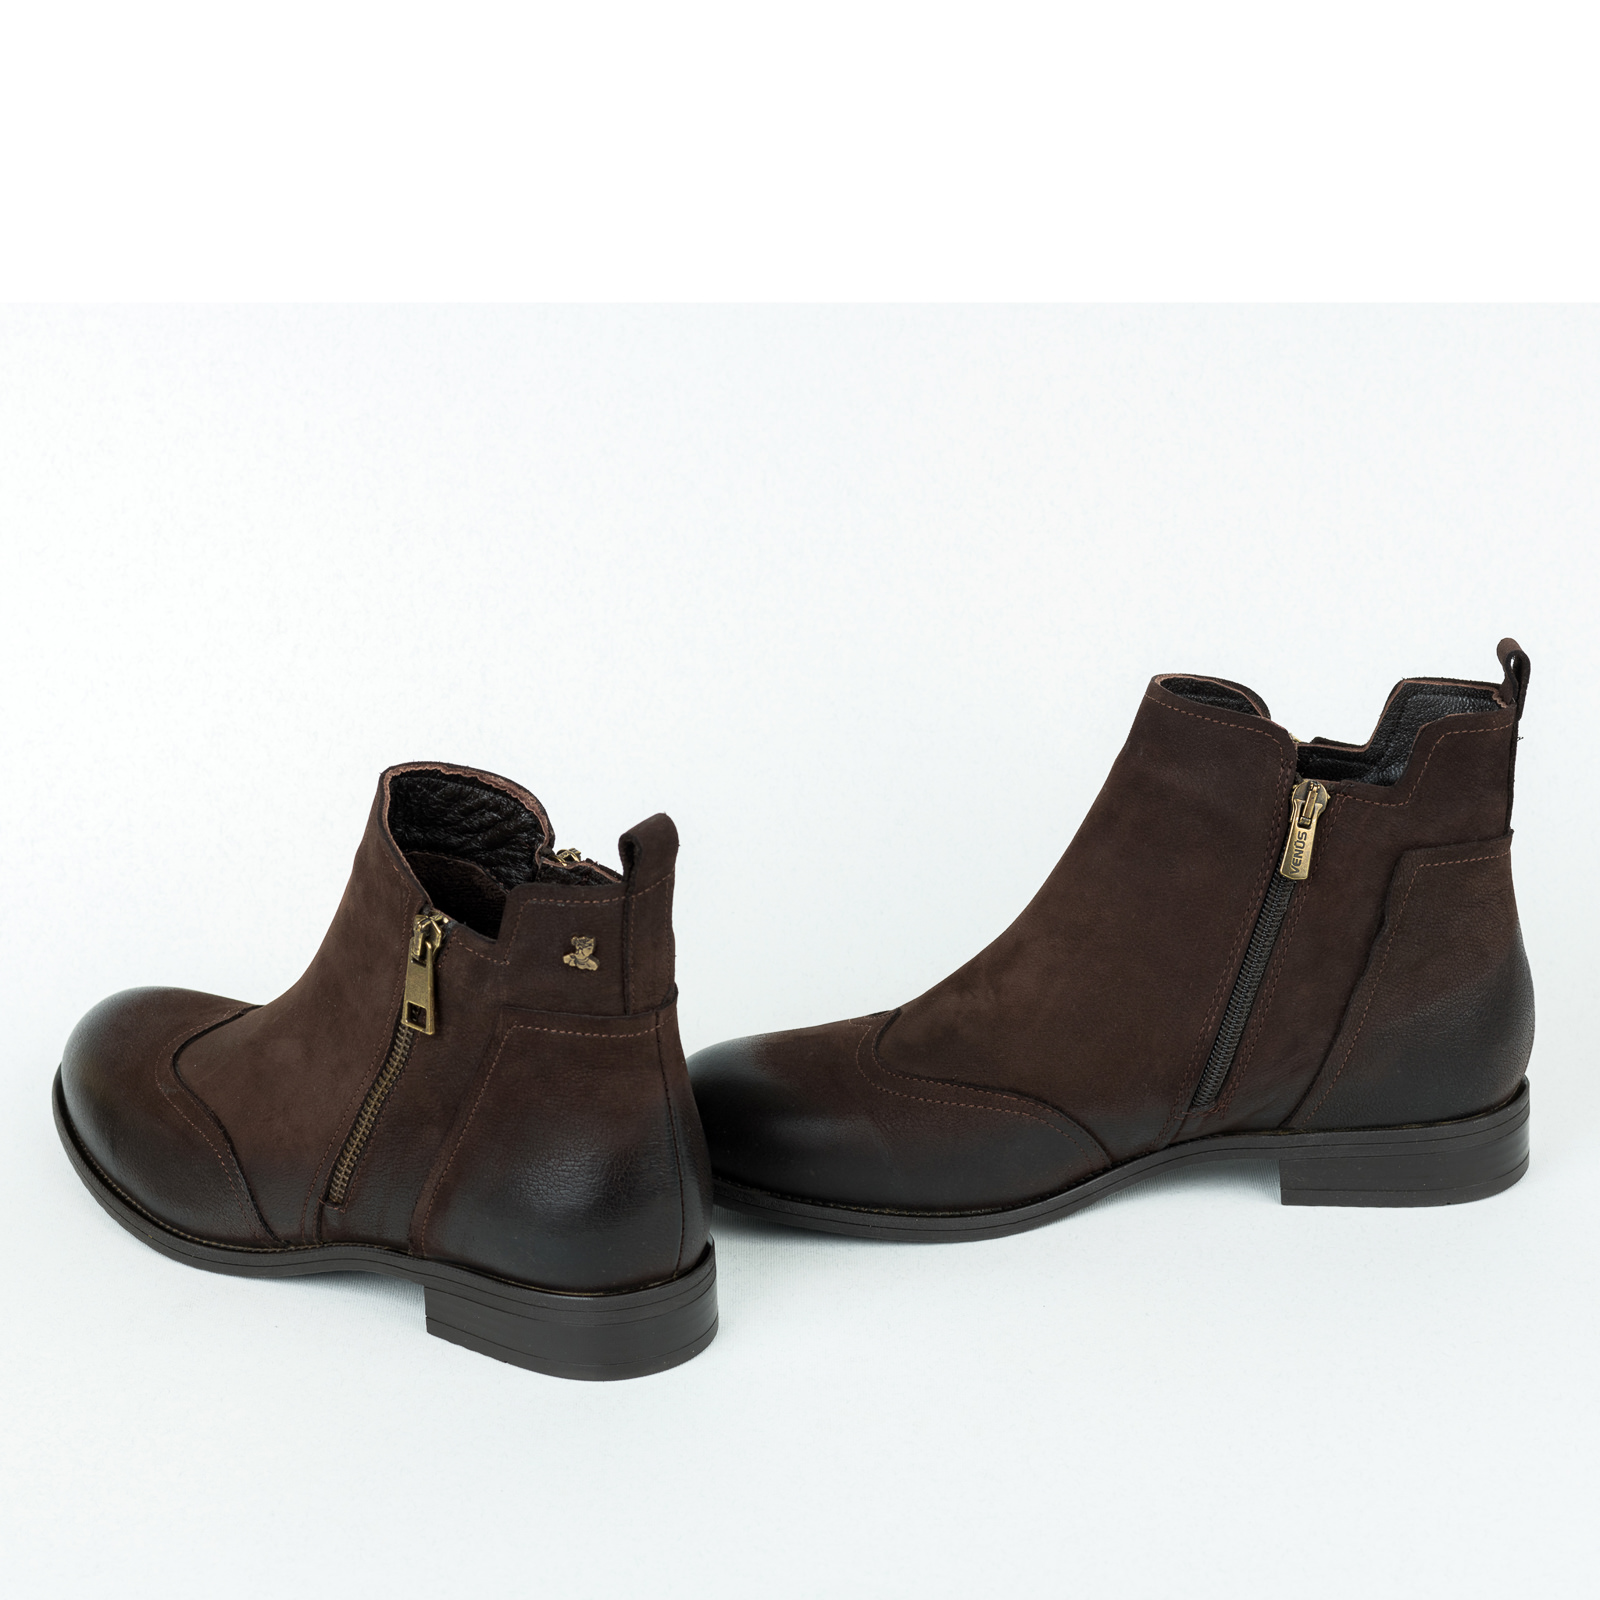 Leather ankle boots B442 - DARK BROWN